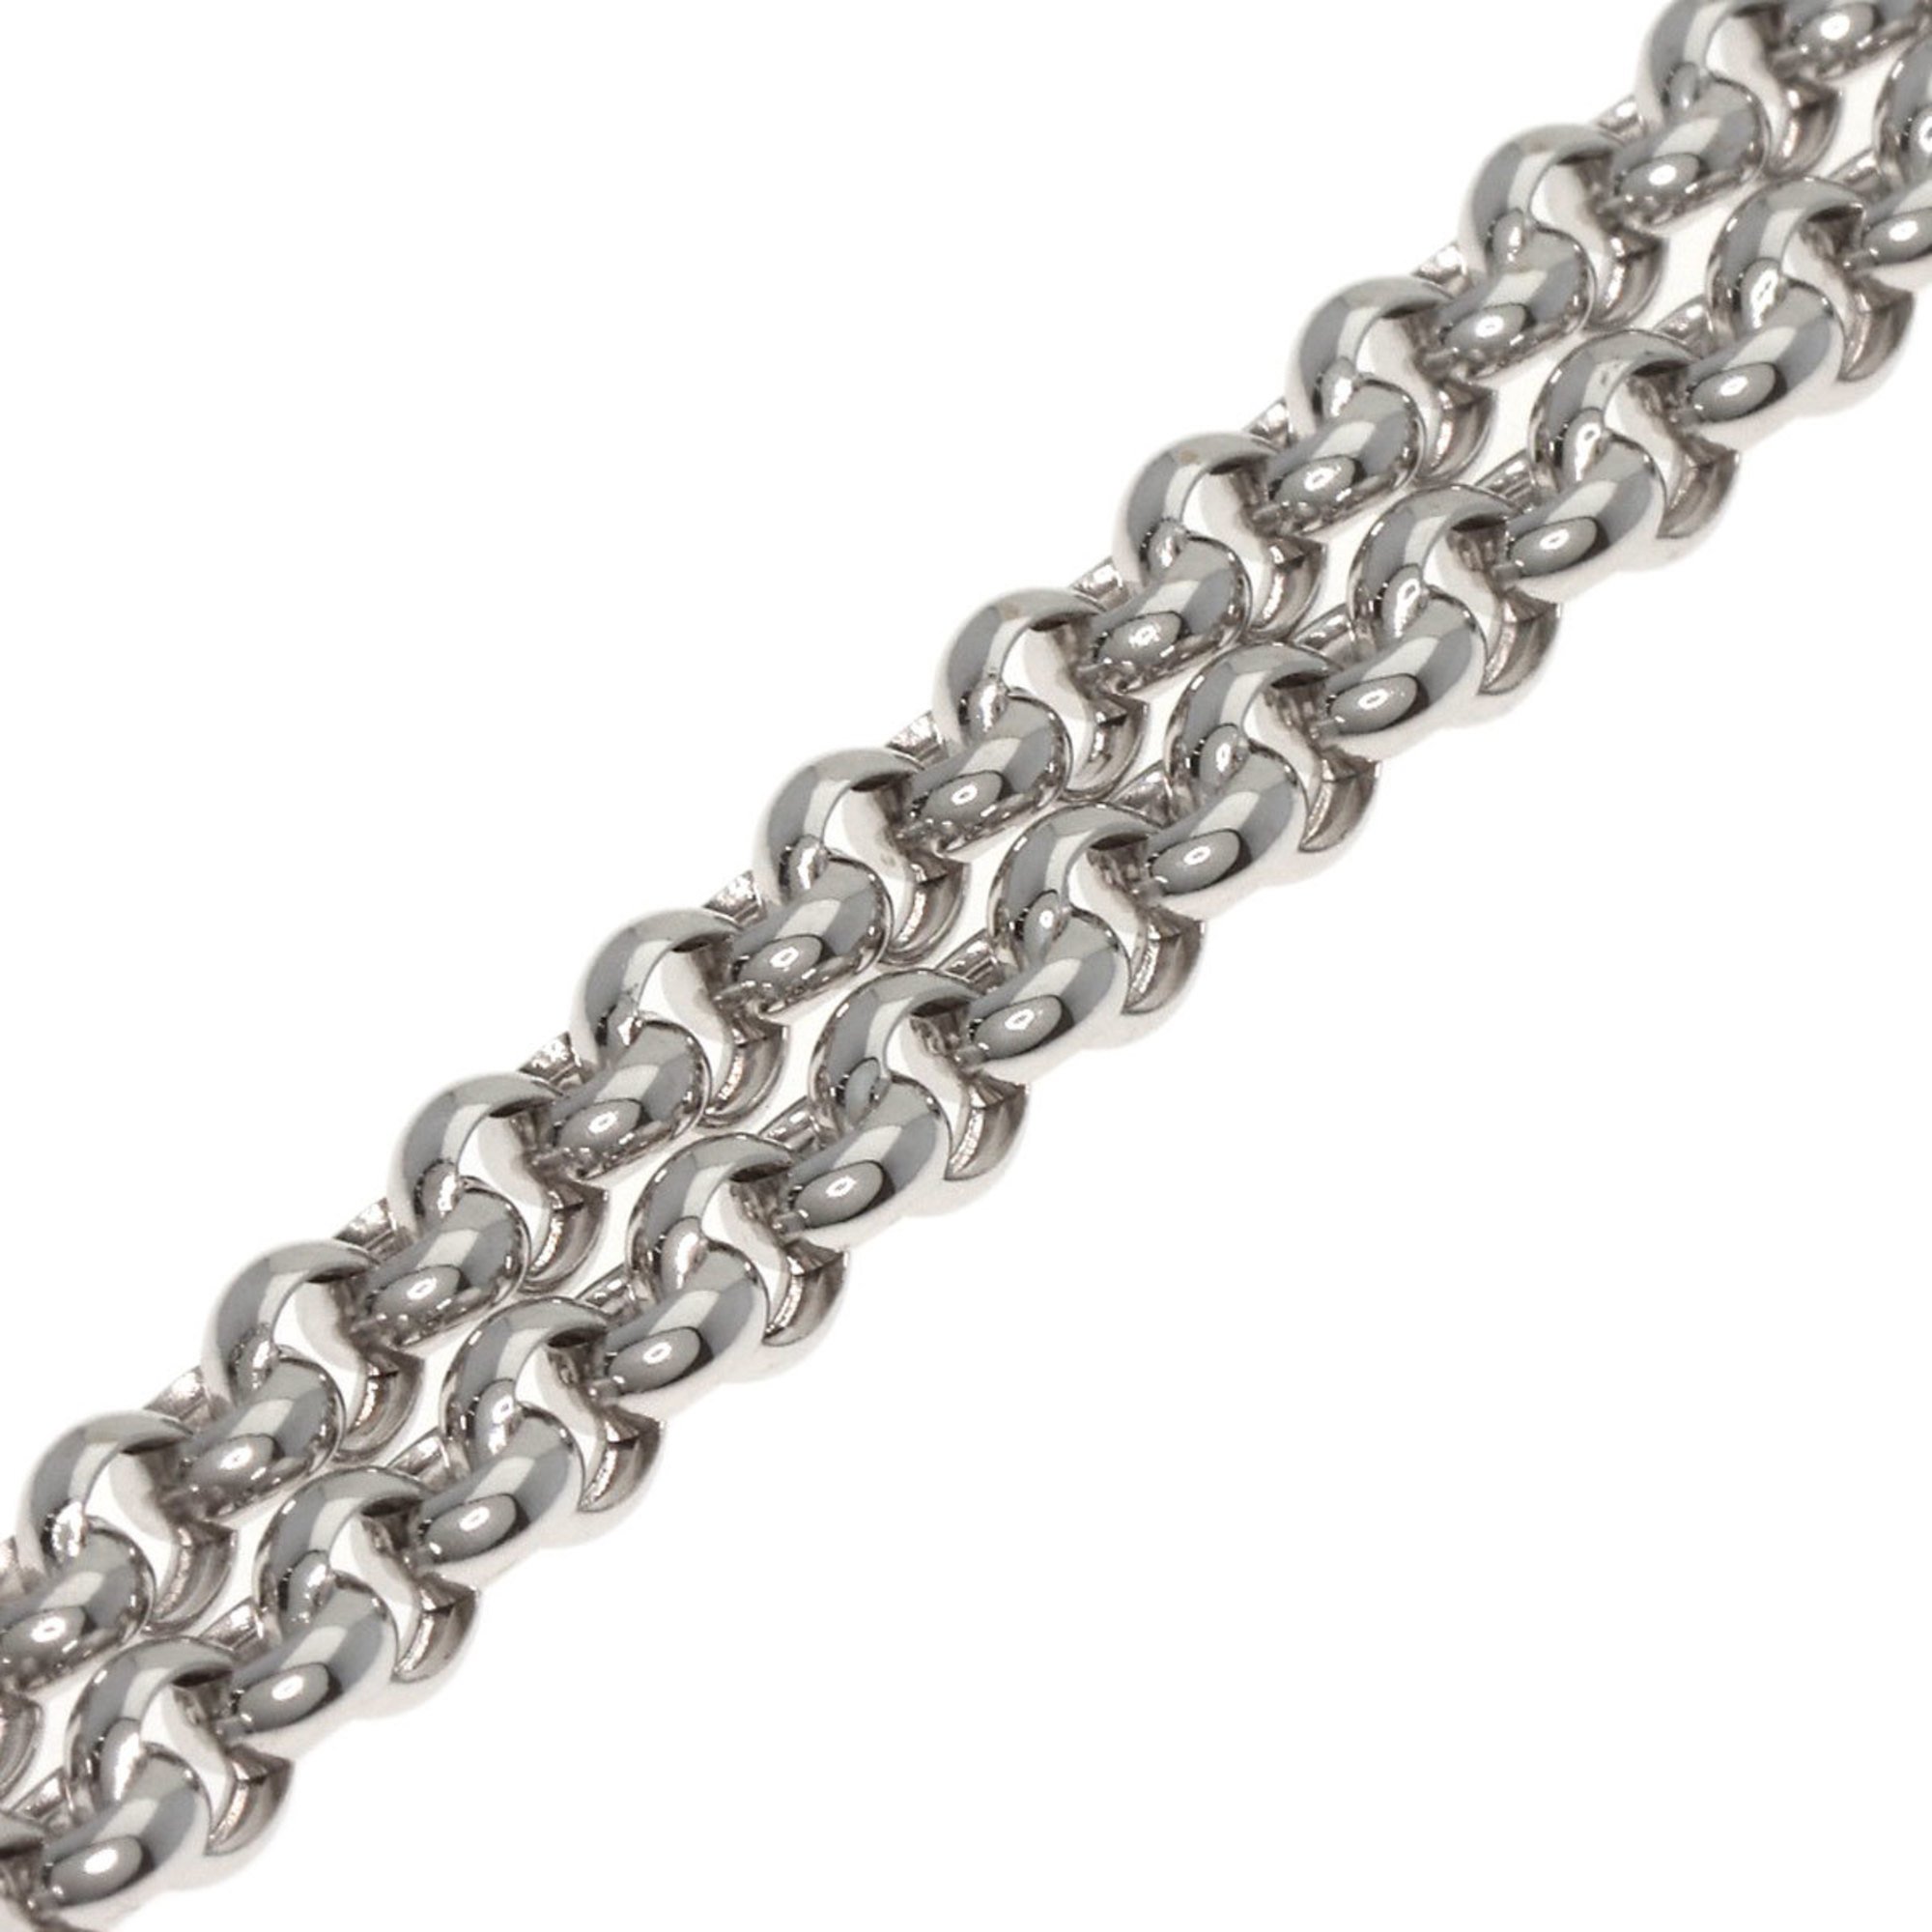 Chopard Chain Only 42cm Necklace K18 White Gold Women's